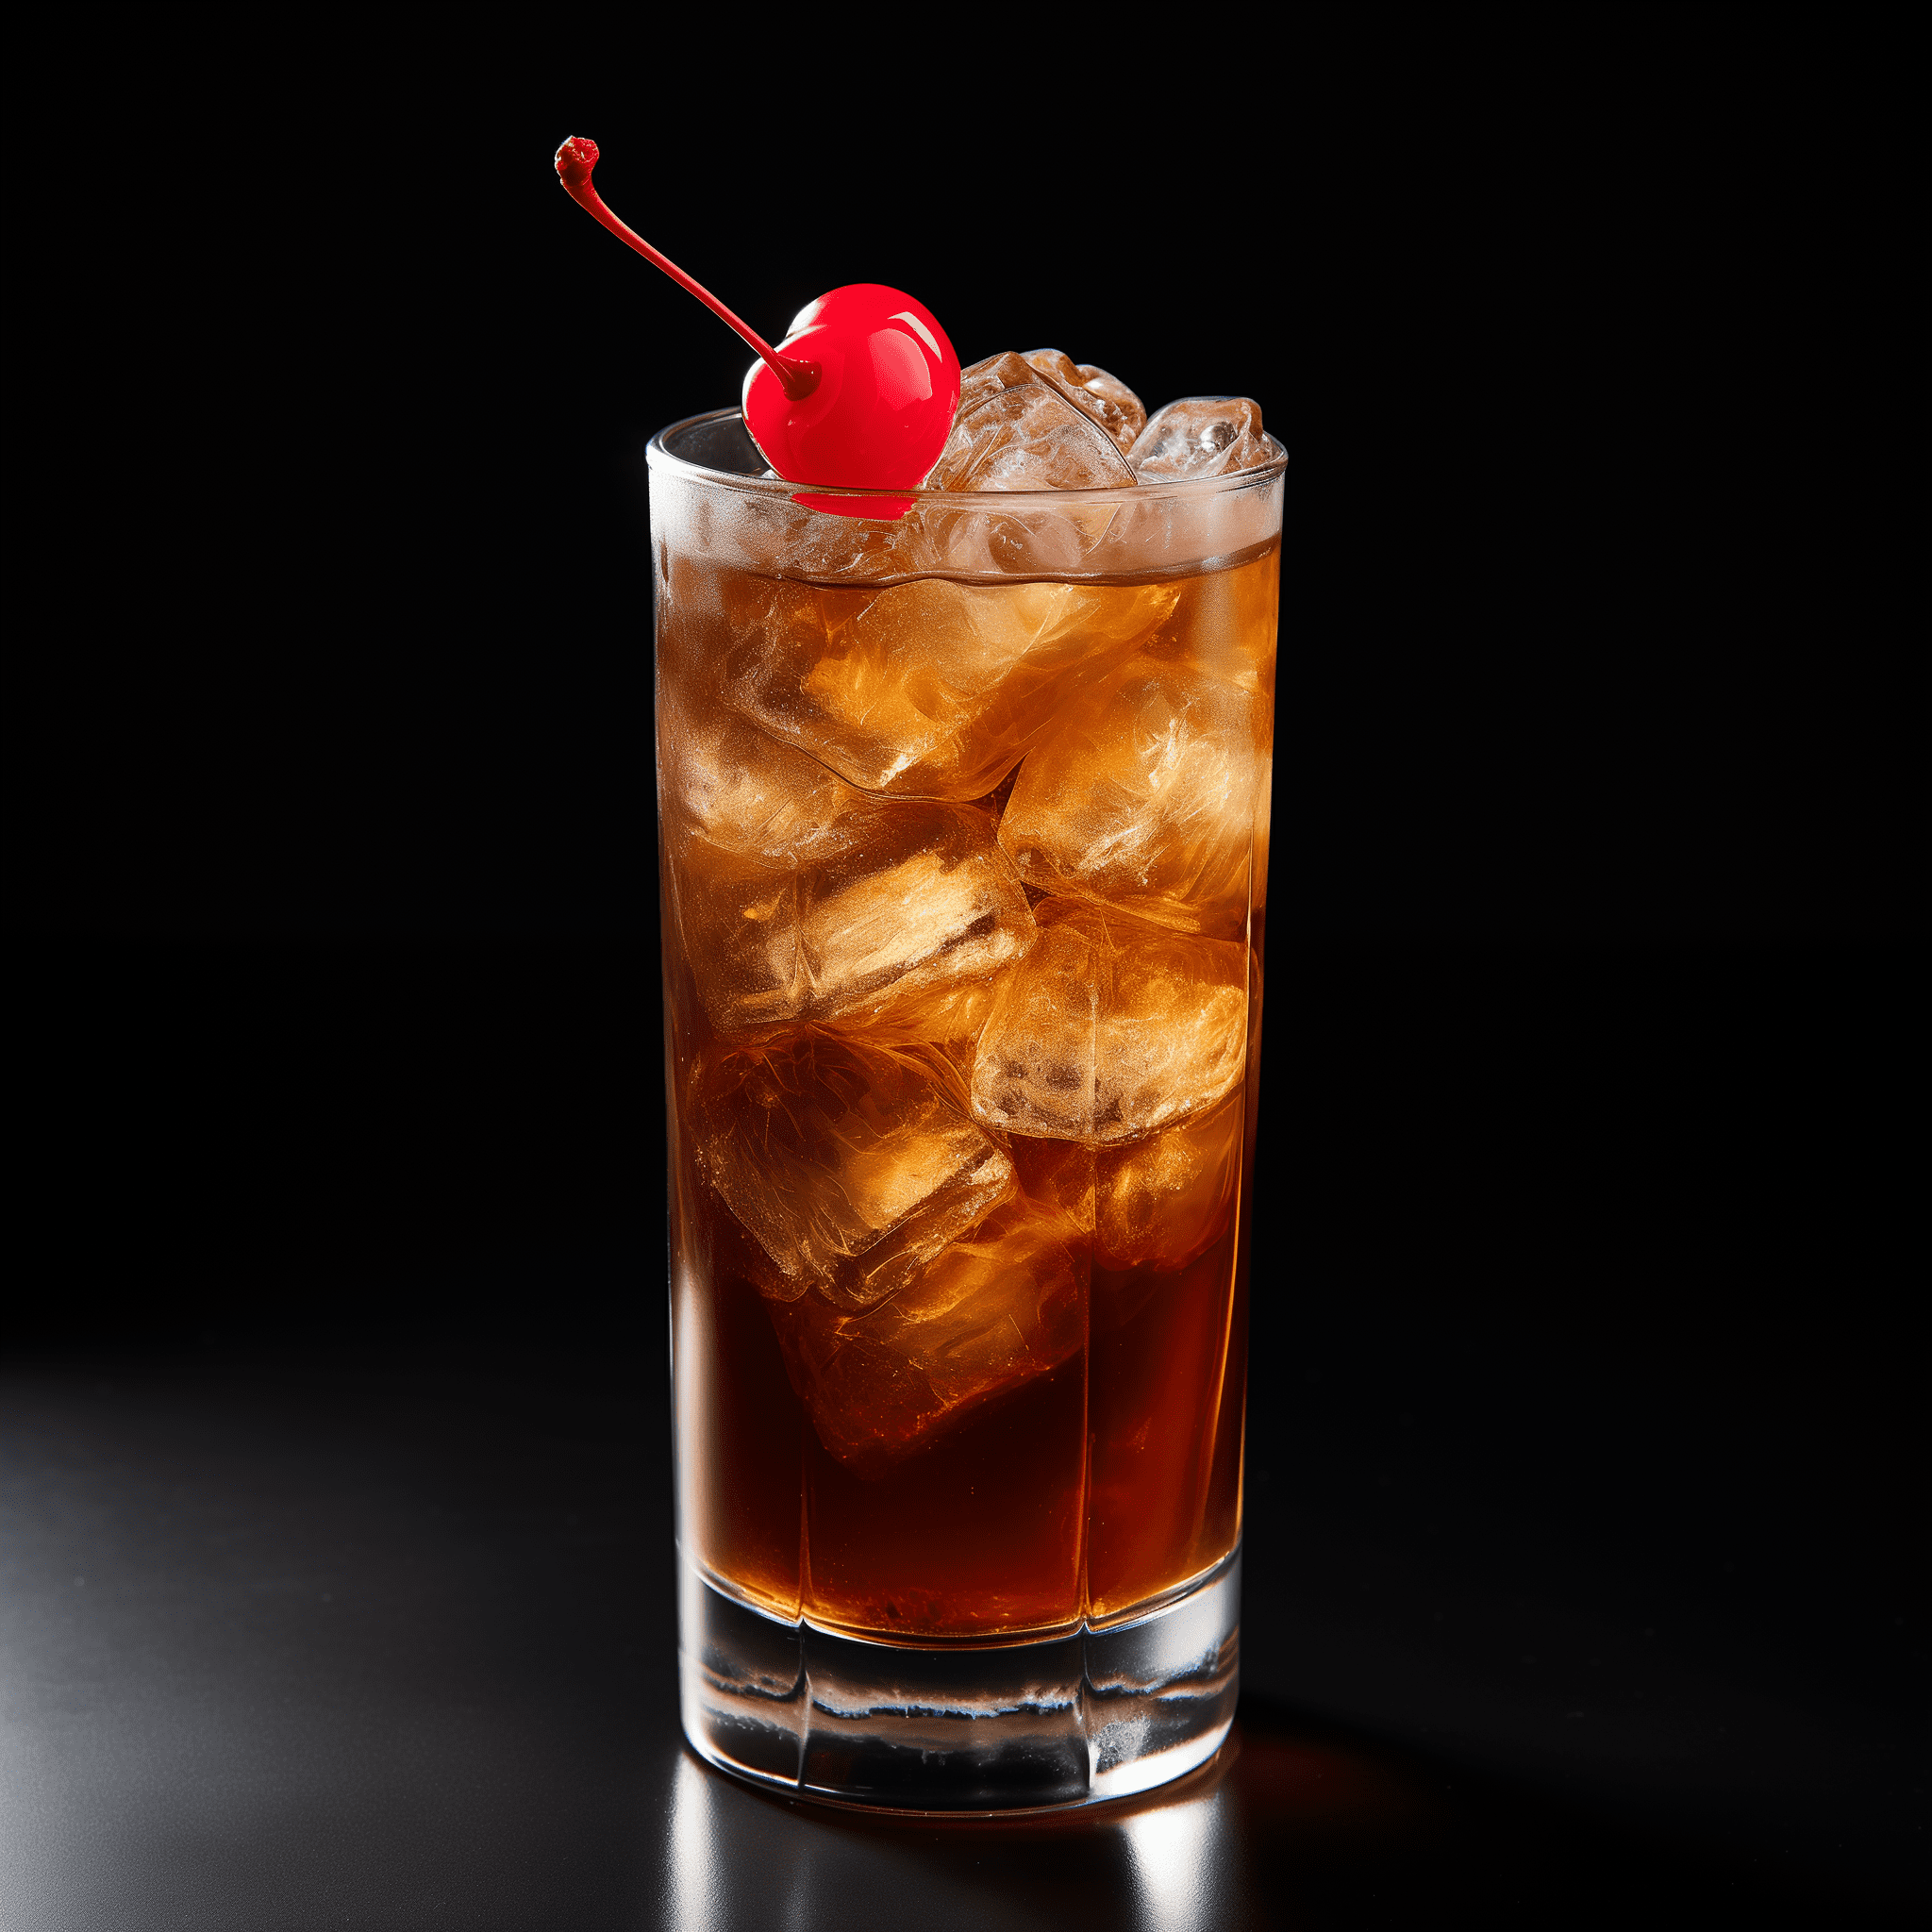 Shirley Temple Black Cocktail Recipe - The Shirley Temple Black is delightfully sweet with a slight tang from the grenadine. The ginger ale provides a gentle fizz, while the cola adds a subtle caramel undertone. It's a refreshing and light beverage, perfect for sipping on a warm day or at a social gathering where alcohol is not desired.